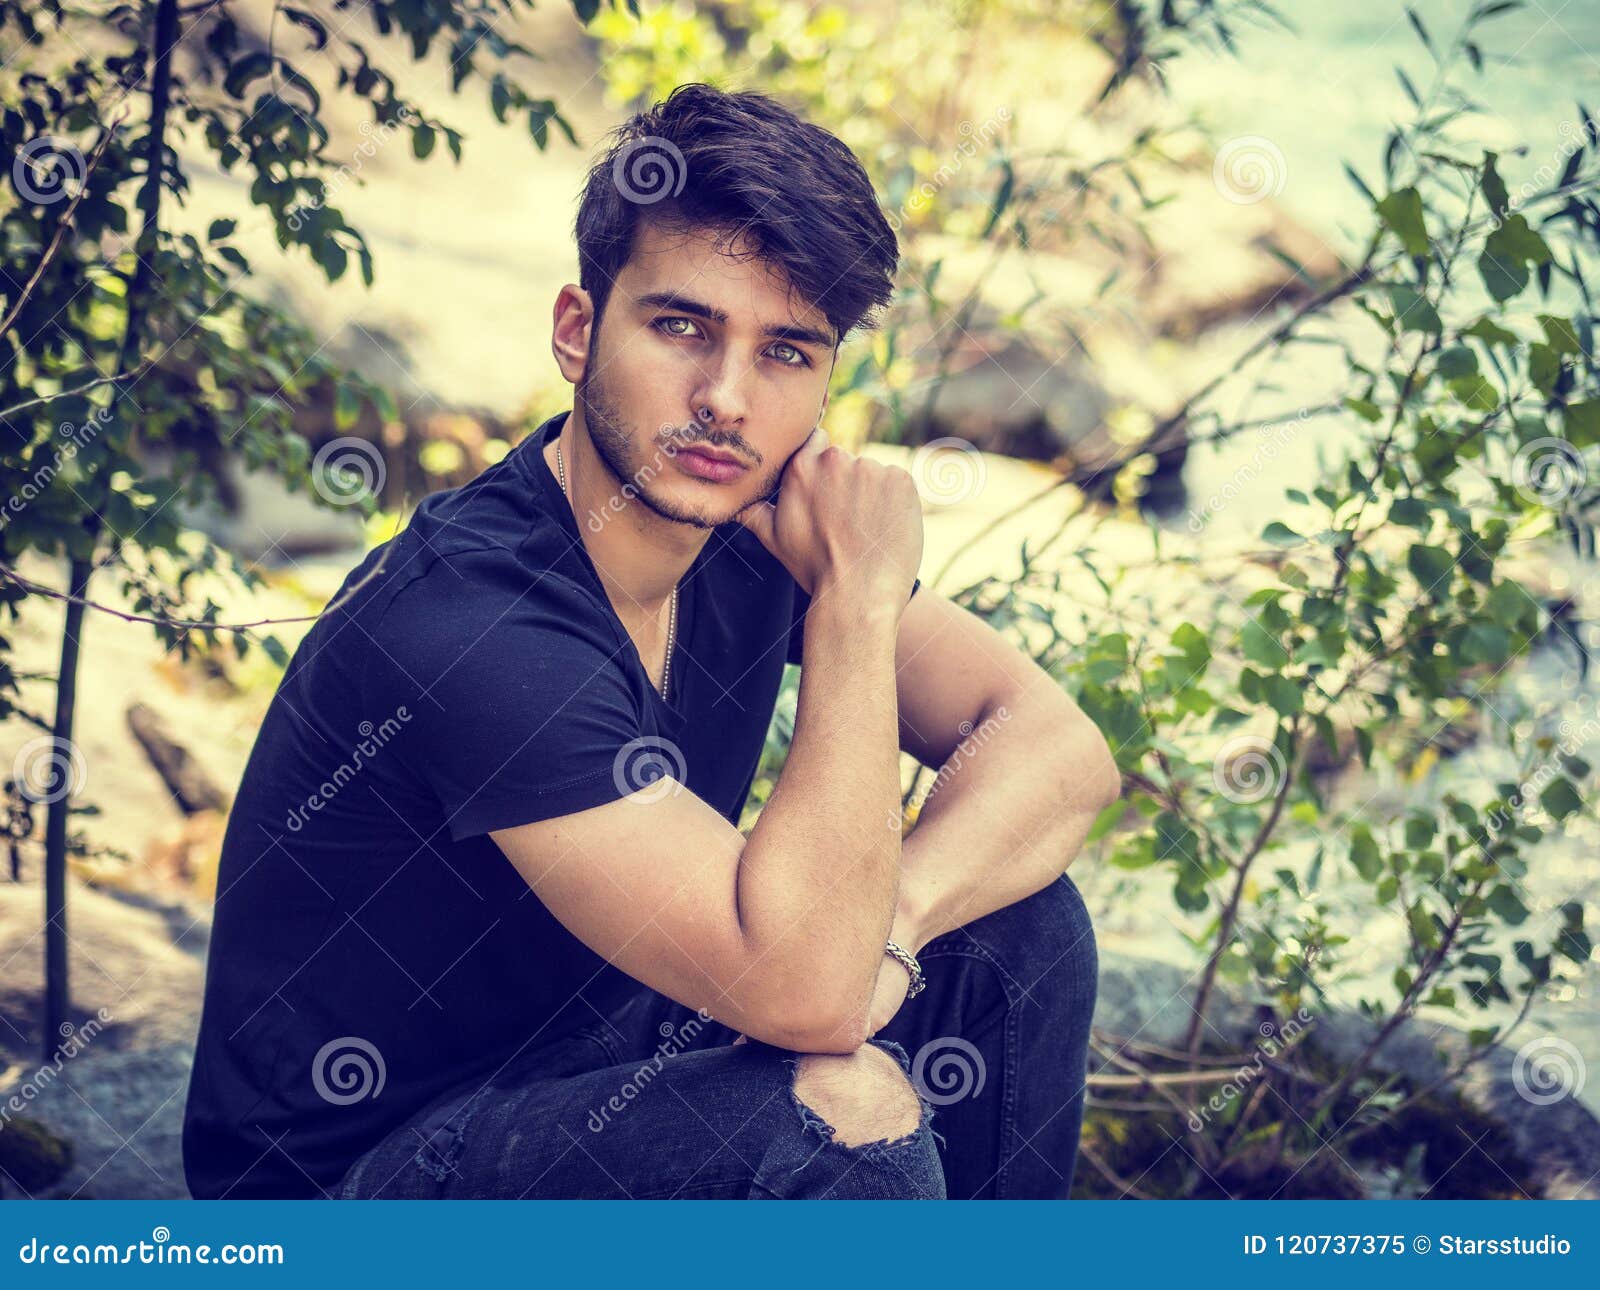 Young Man Relaxing in the Mountain Stock Image - Image of lifestyle ...